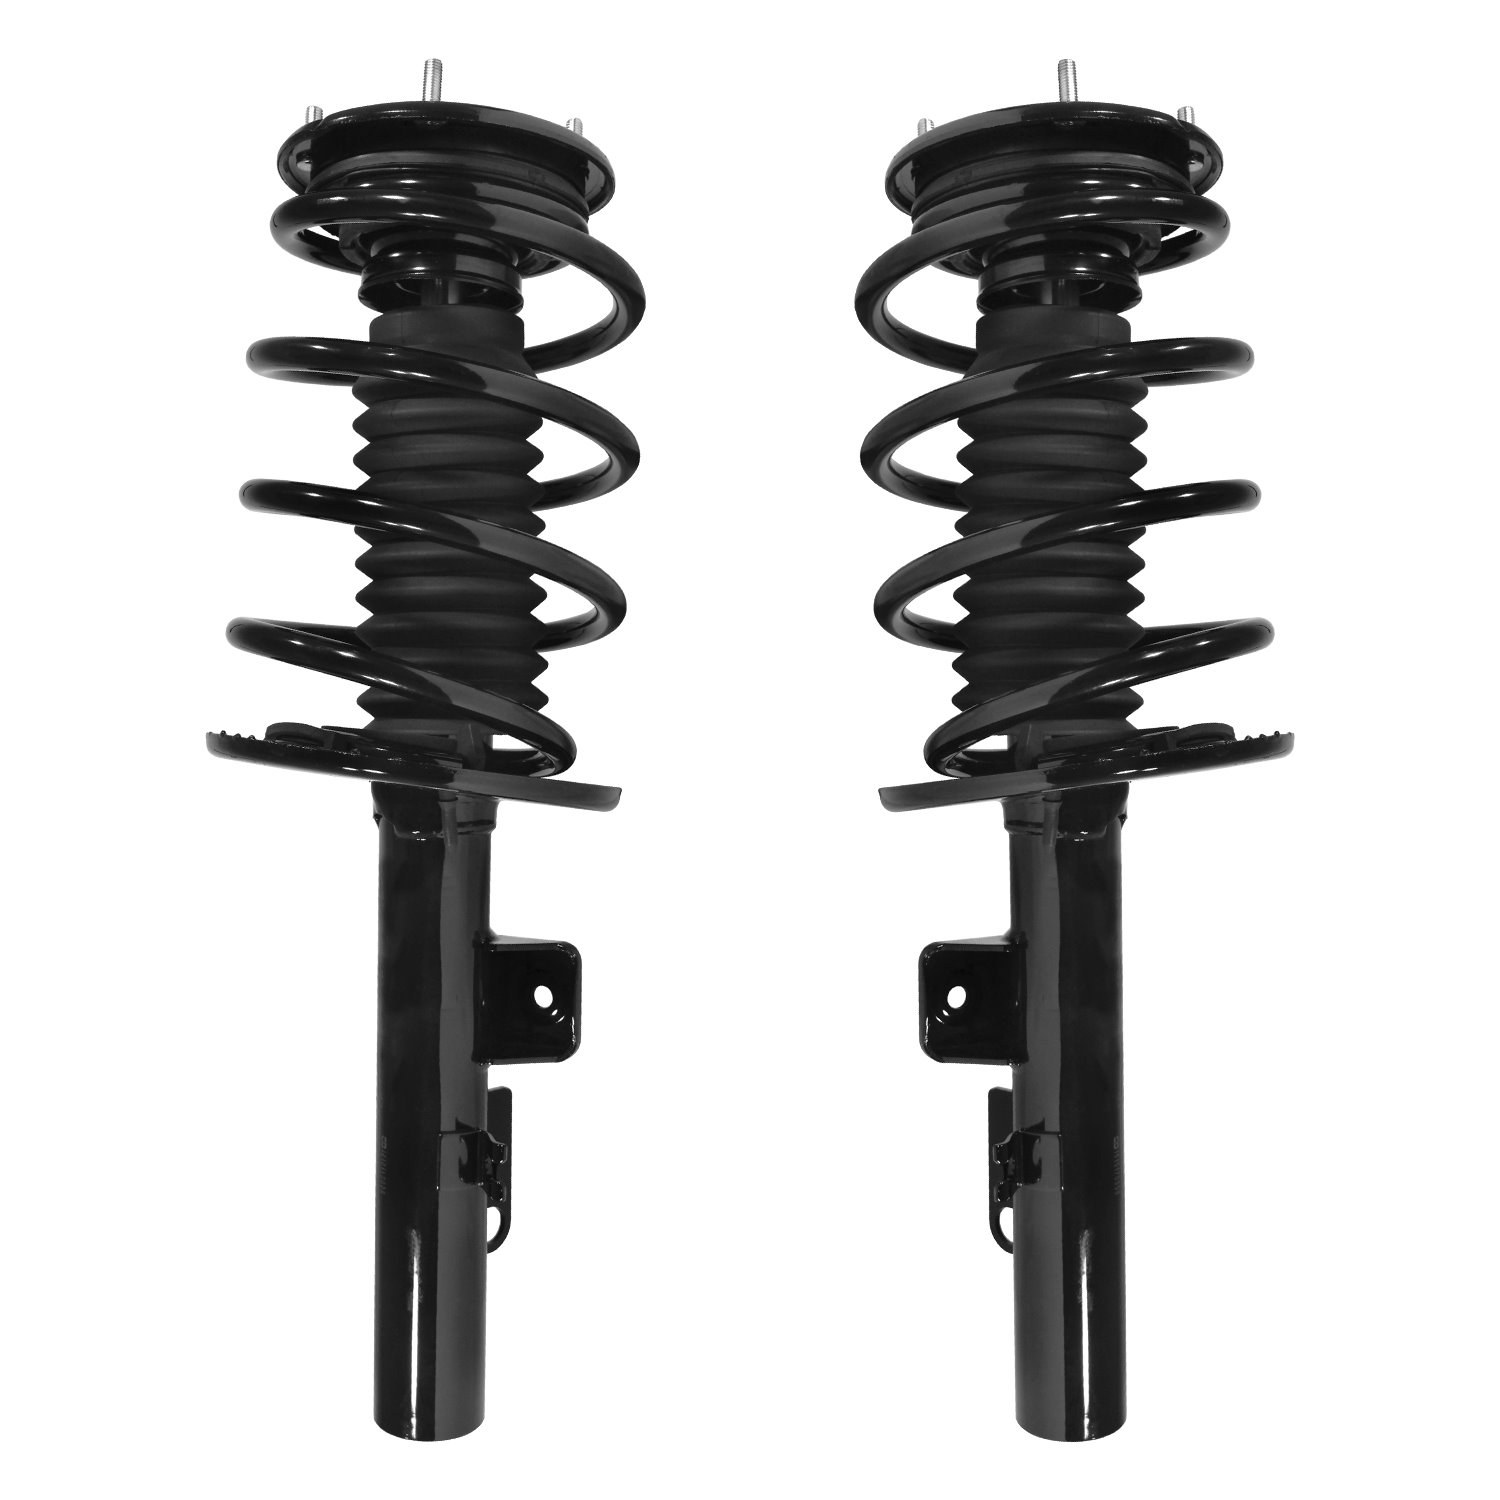 2-11543-11544-001 Suspension Strut & Coil Spring Assembly Set Fits Select Ford Taurus, Mercury Sable